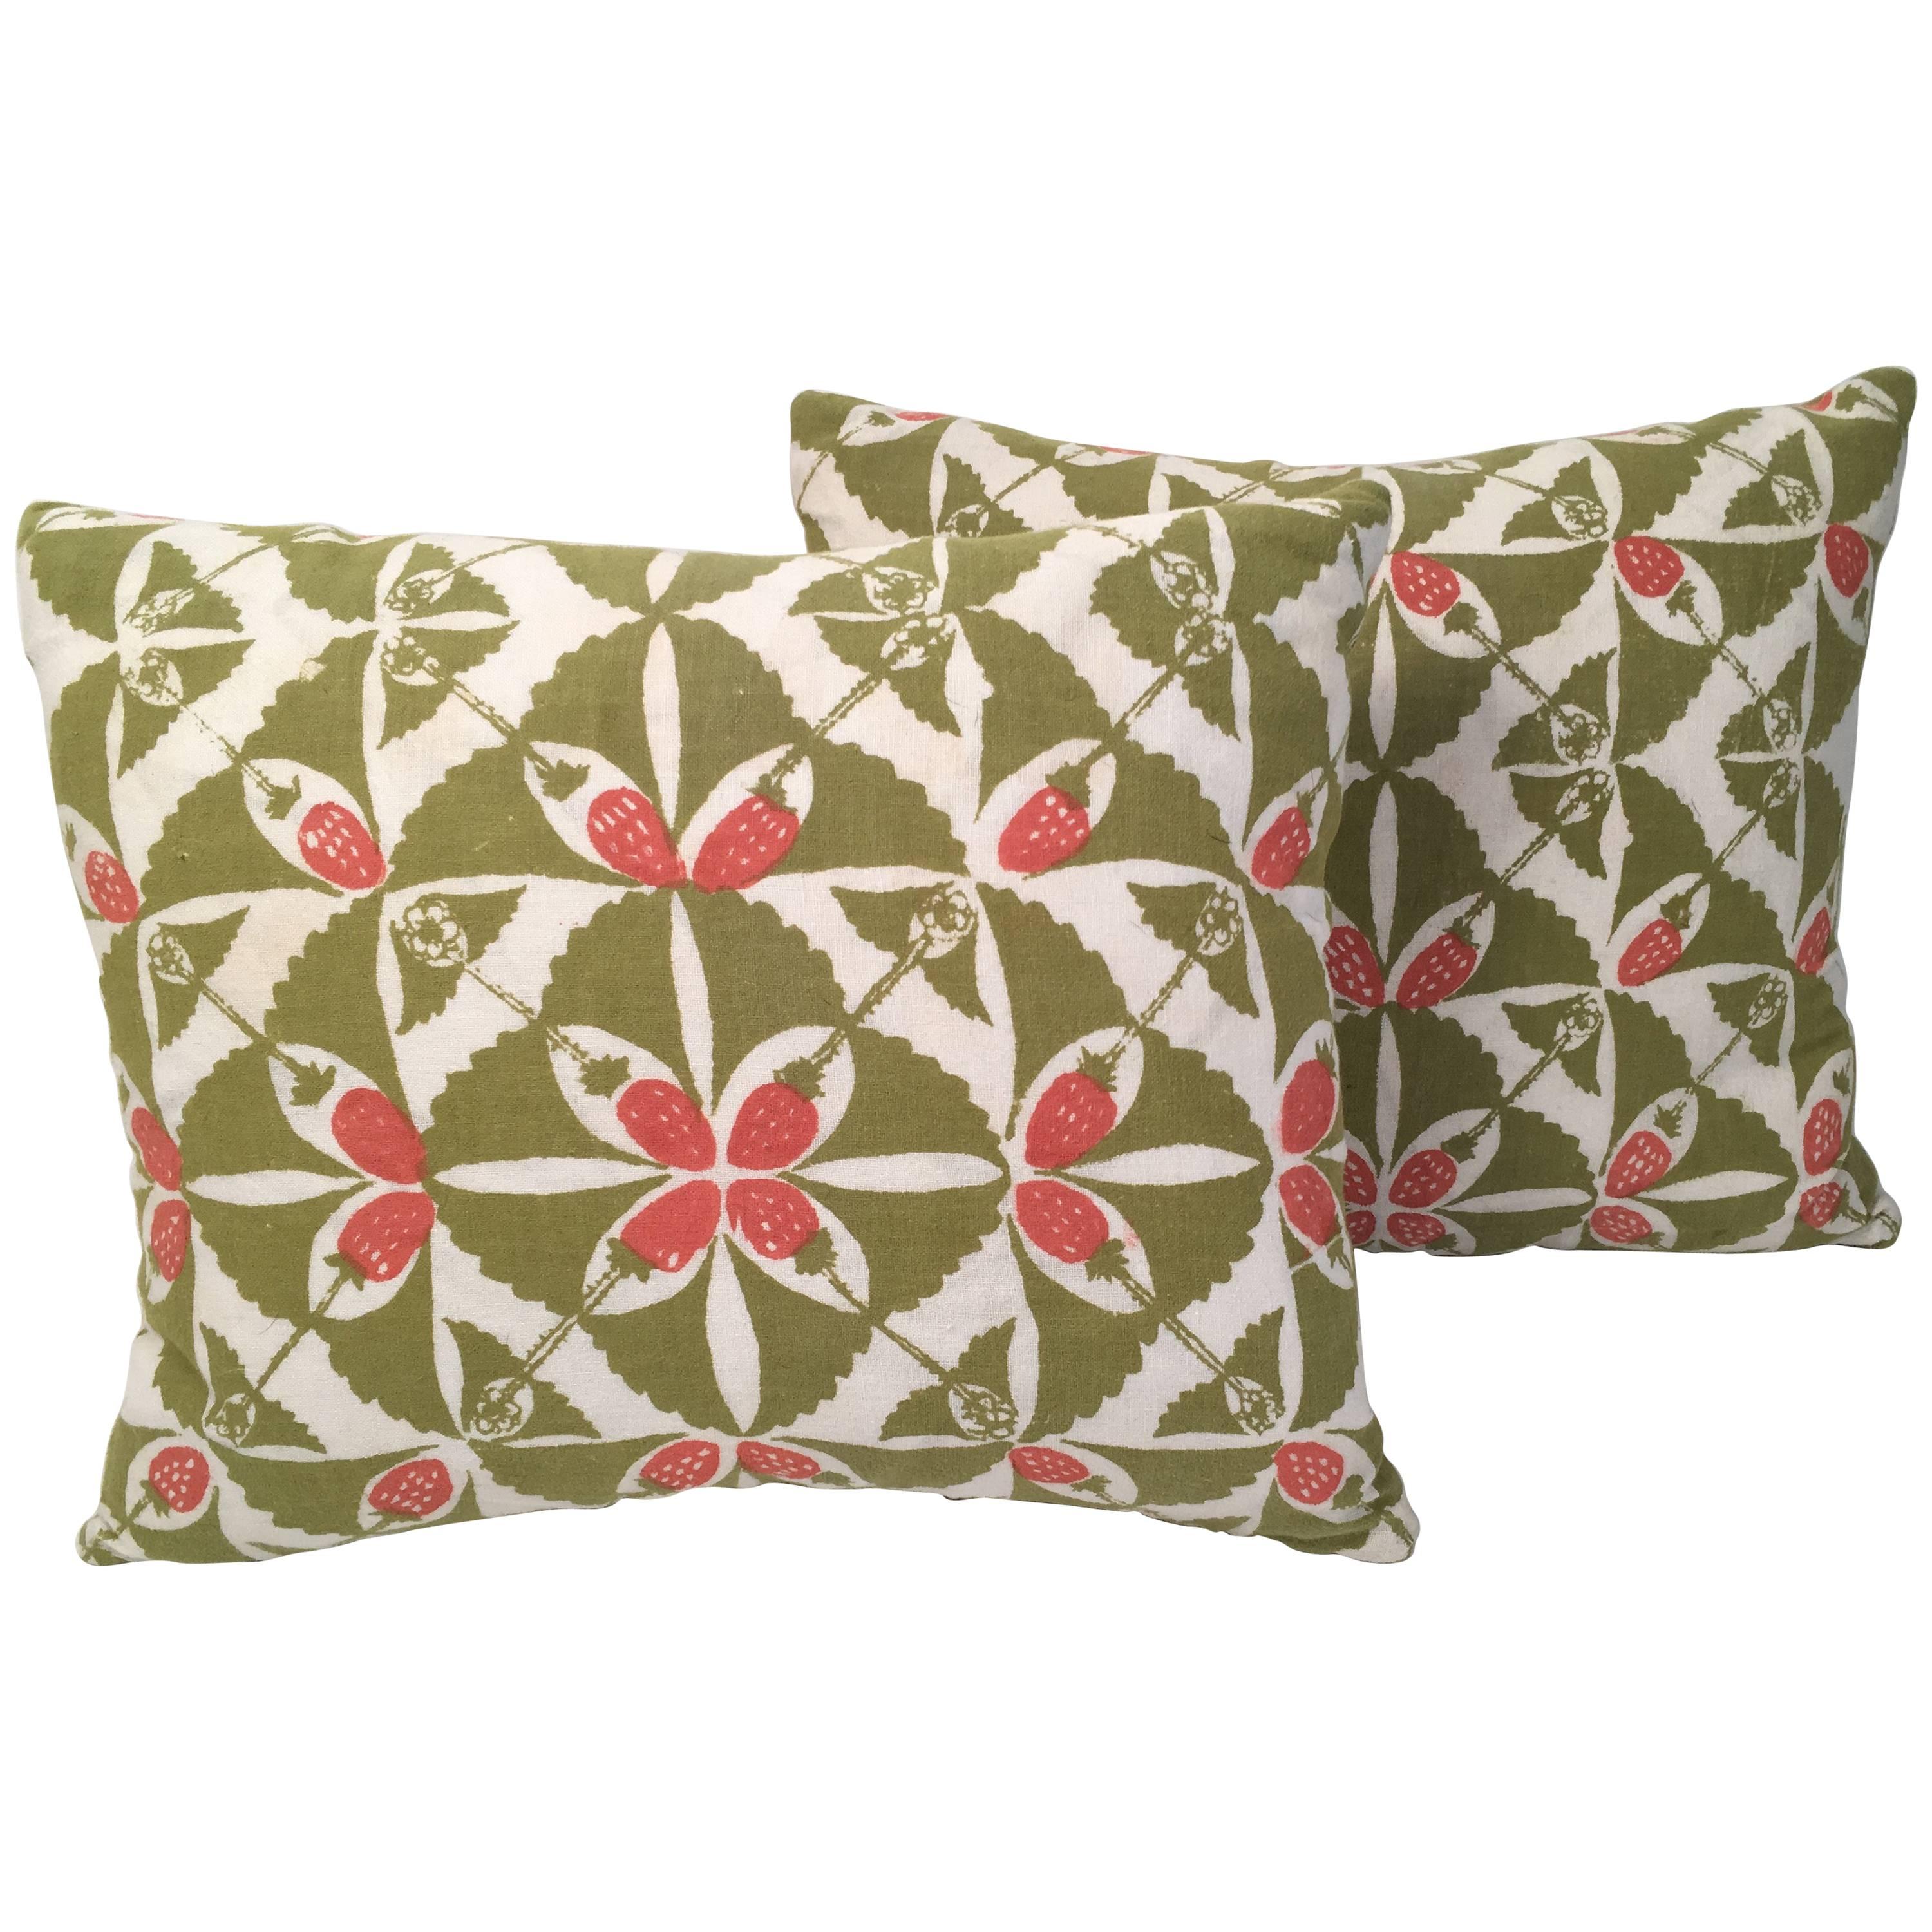 Hand Block Printed Strawberry Patch Pillow by the Folly Cove Designers